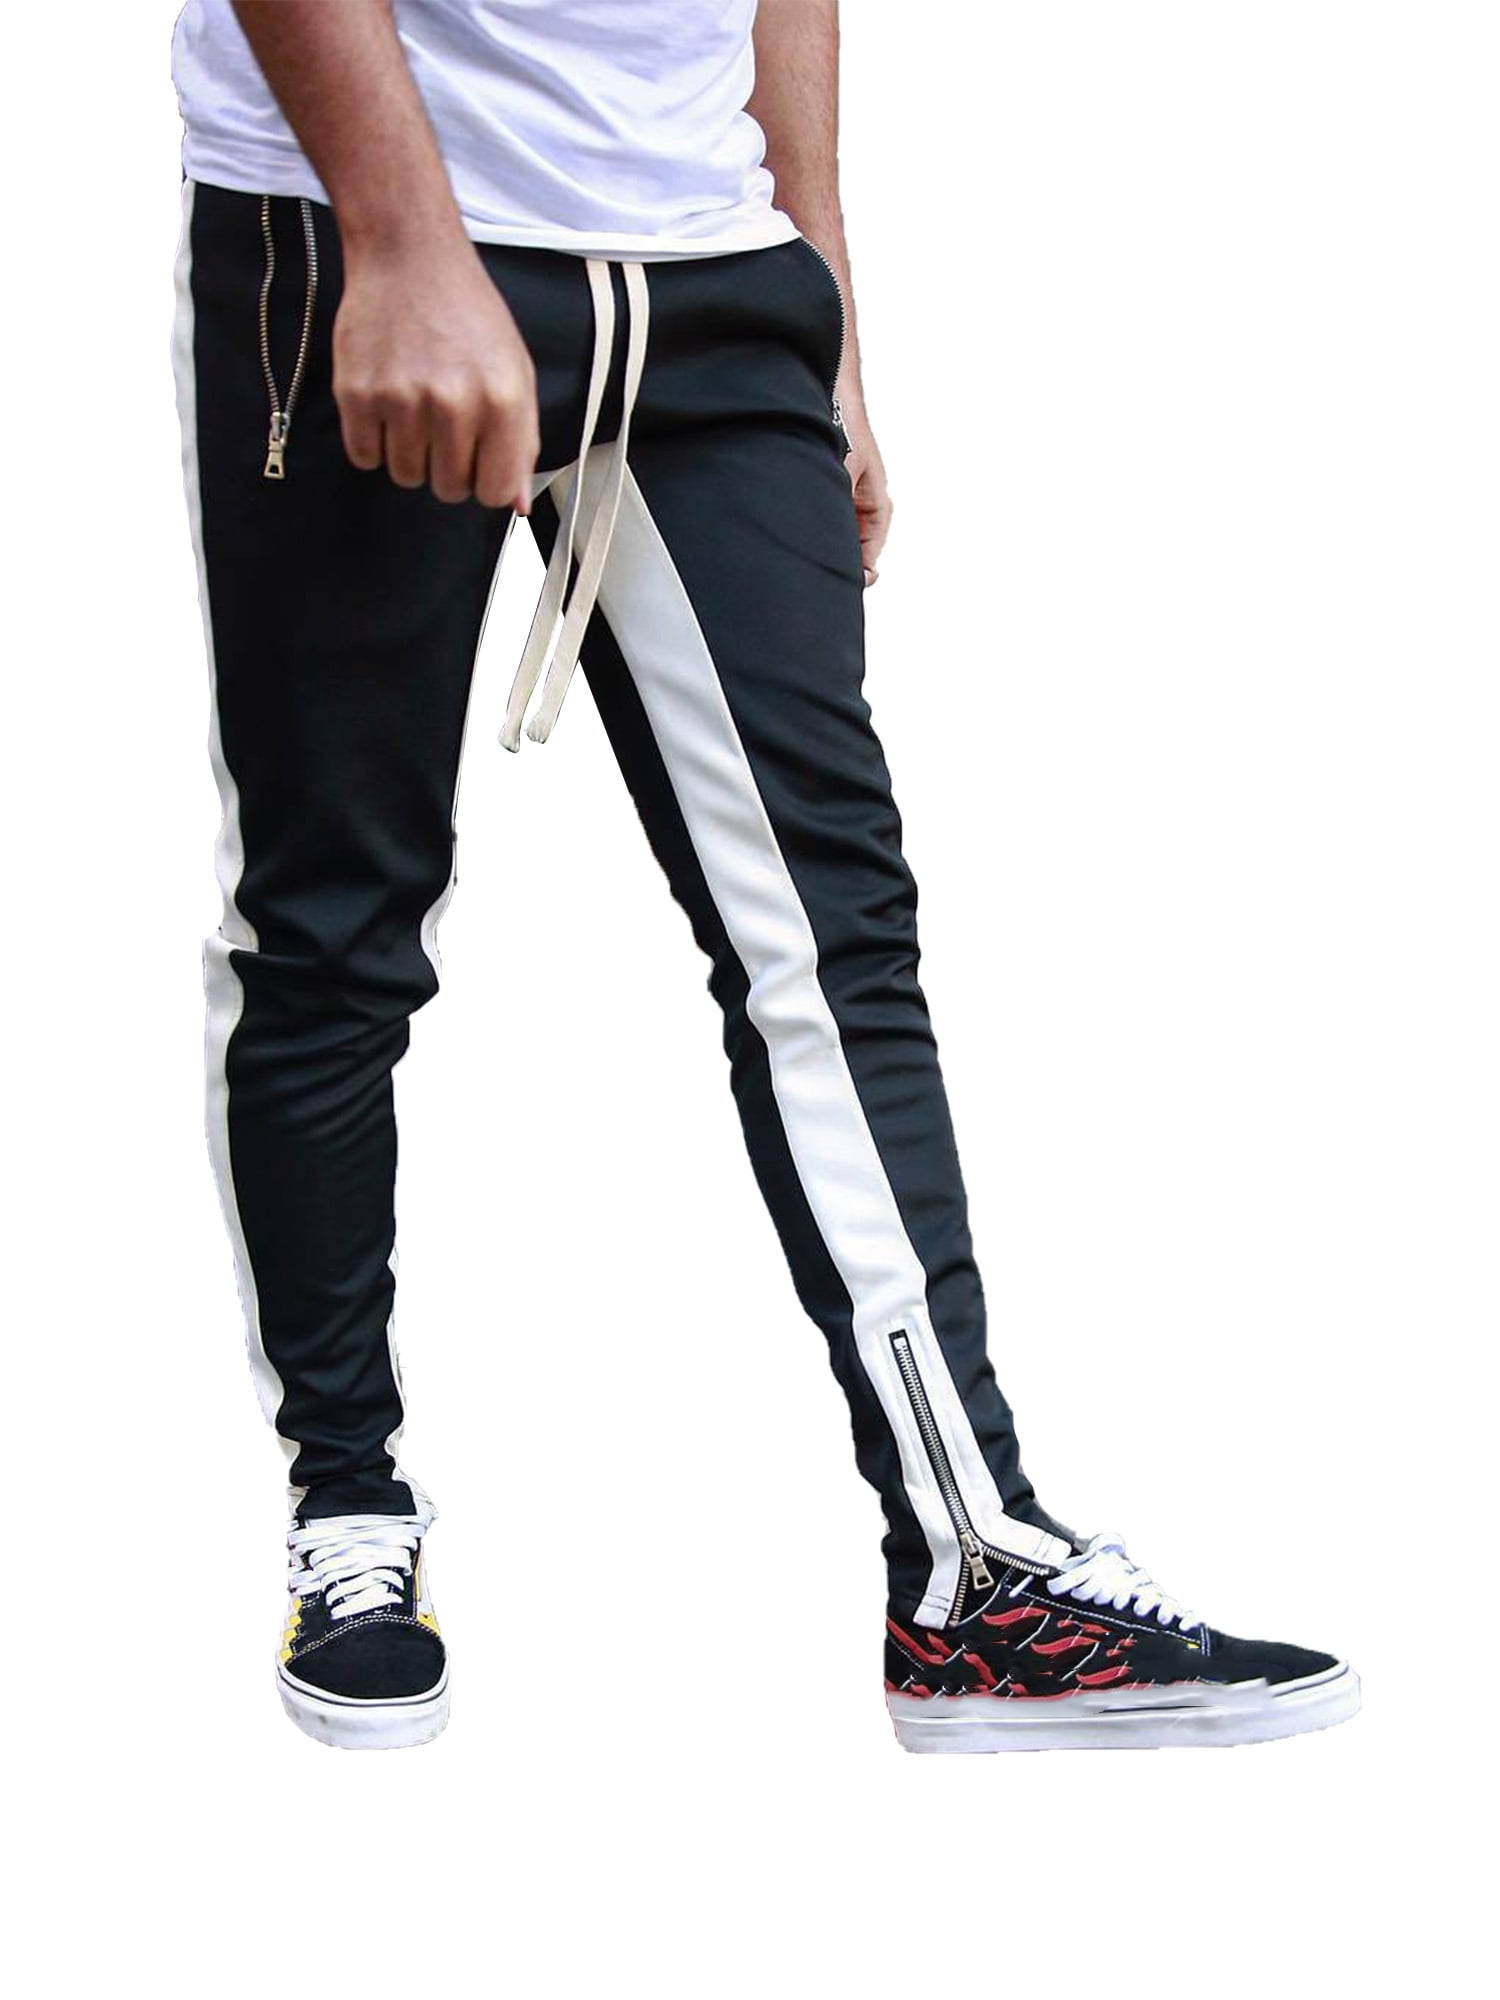 Slim Fit Workout Pants Mens Joggers Sweatpants Casual Athletic Jogging Pants with Sides Pockets 